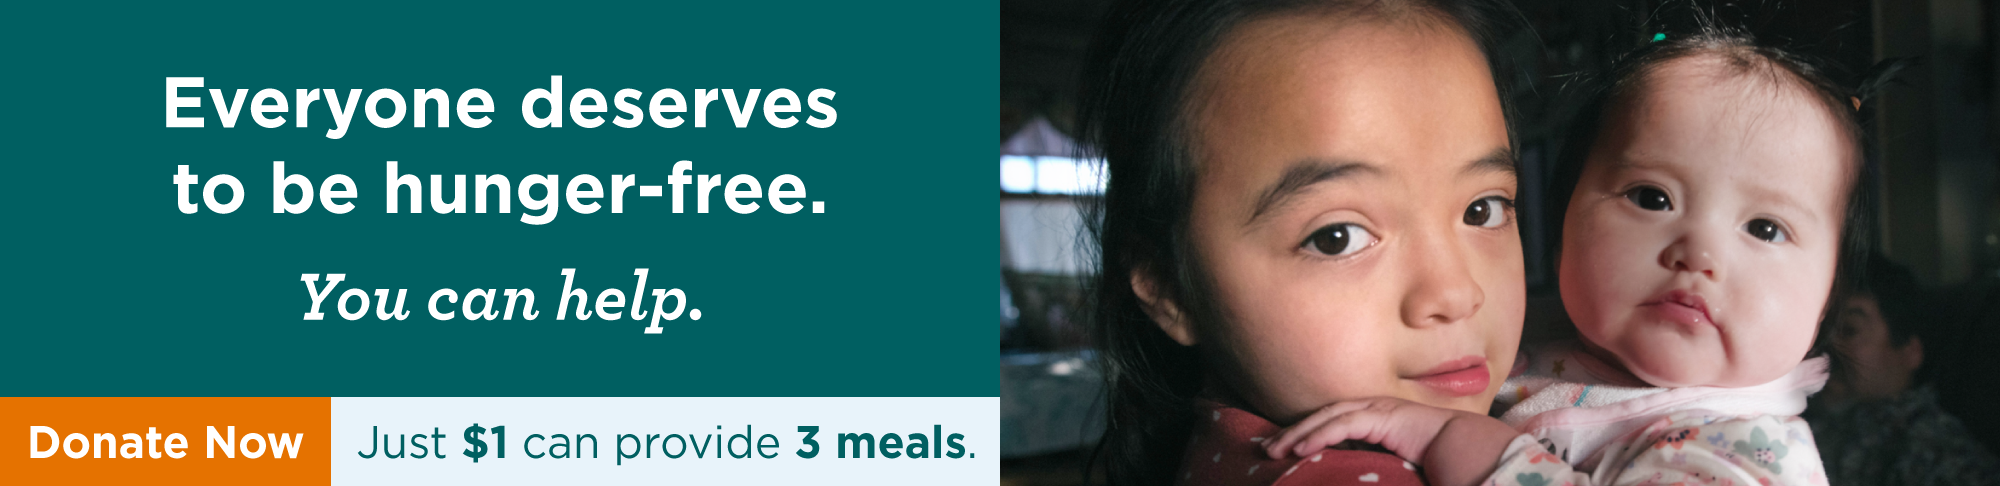 Everyone deserves to be hunger-free. You can help.